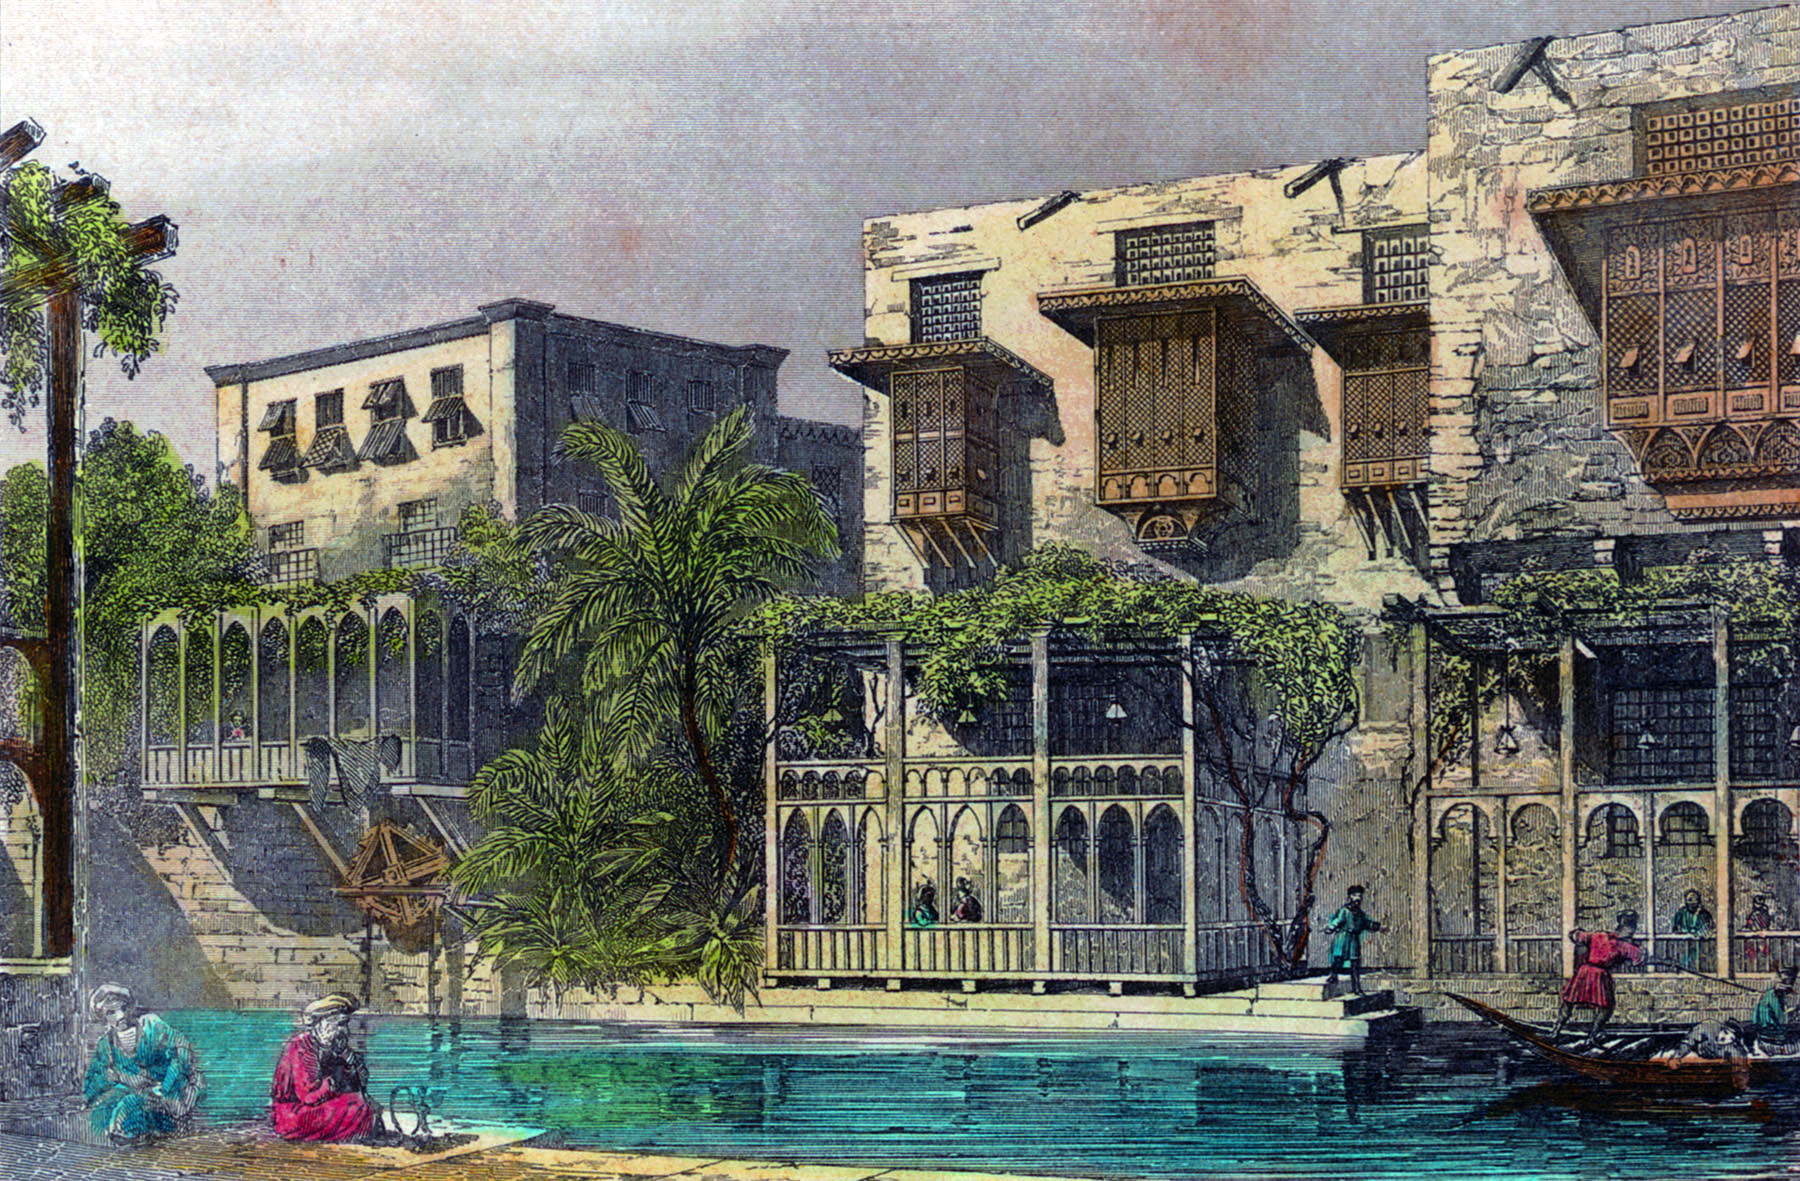 Not far from the site of the sabil-kuttab of Mustafa III, a lithograph published in 1821 in <em>Egypte Moderne</em> by A.F. Lemaitre shows a few of the villas along the Khalig al-Misri canal.